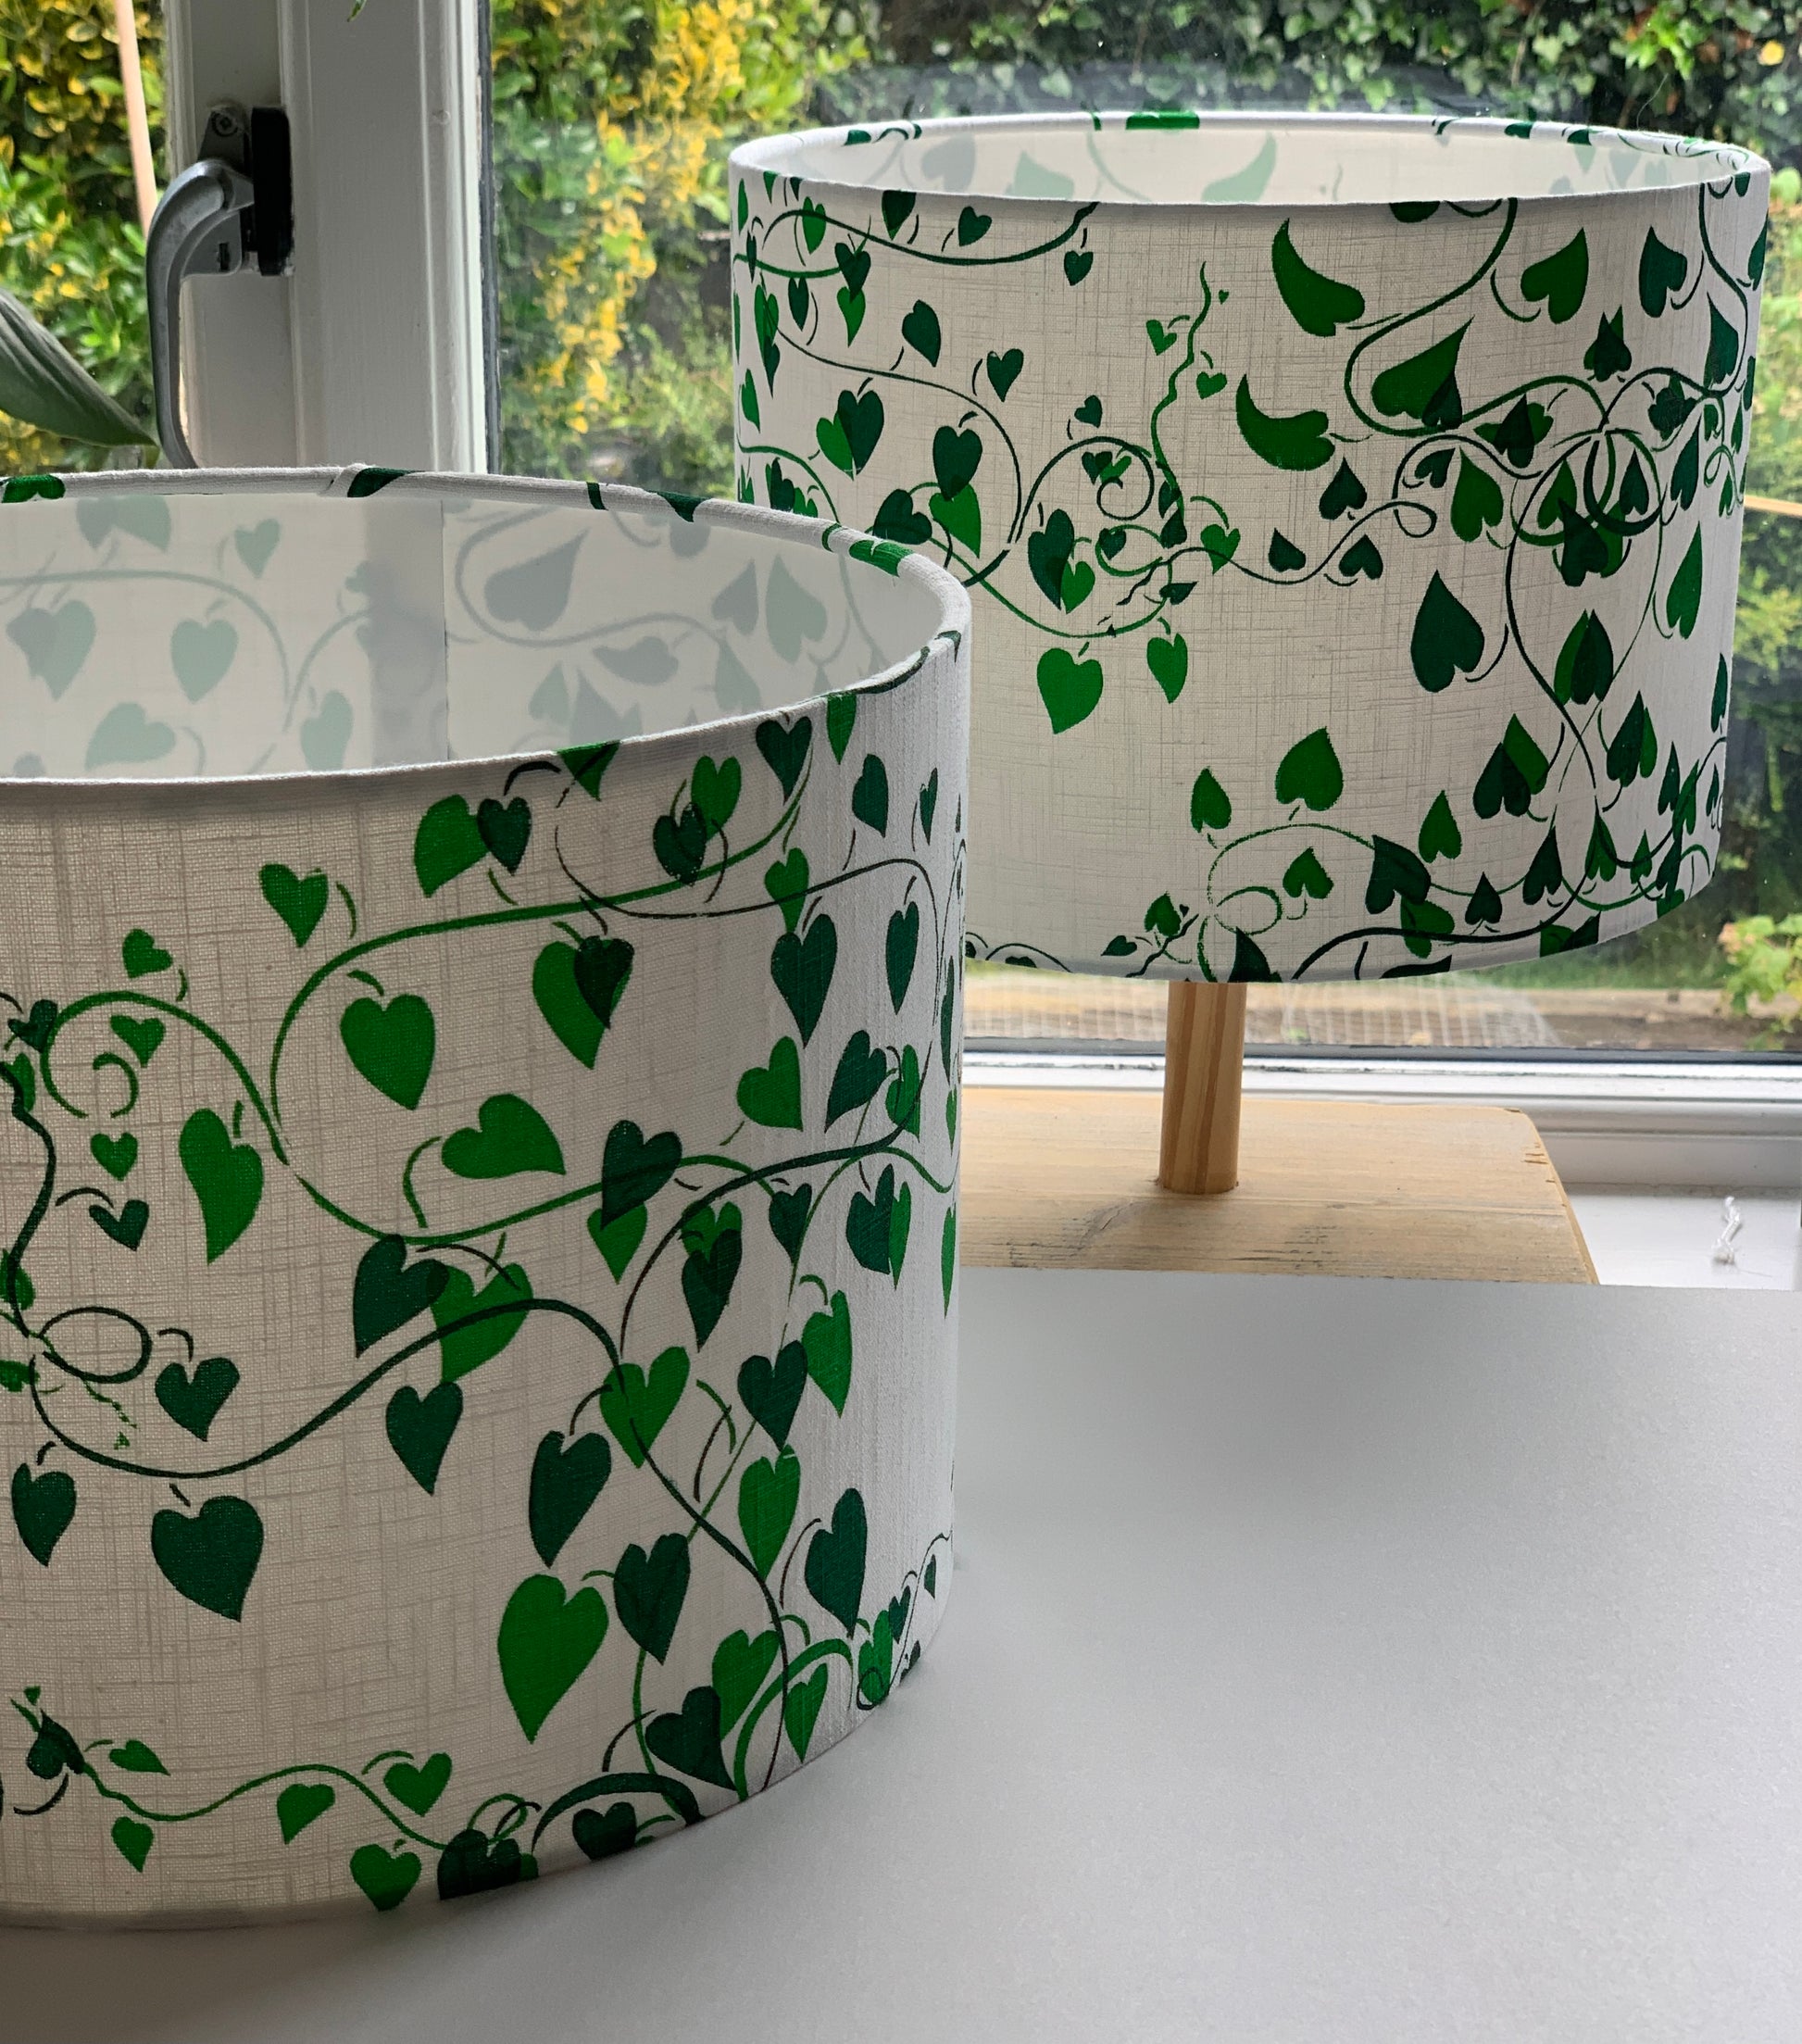  Two shades of green on white fabric  handprinted lampshades in  a convolvulus design.